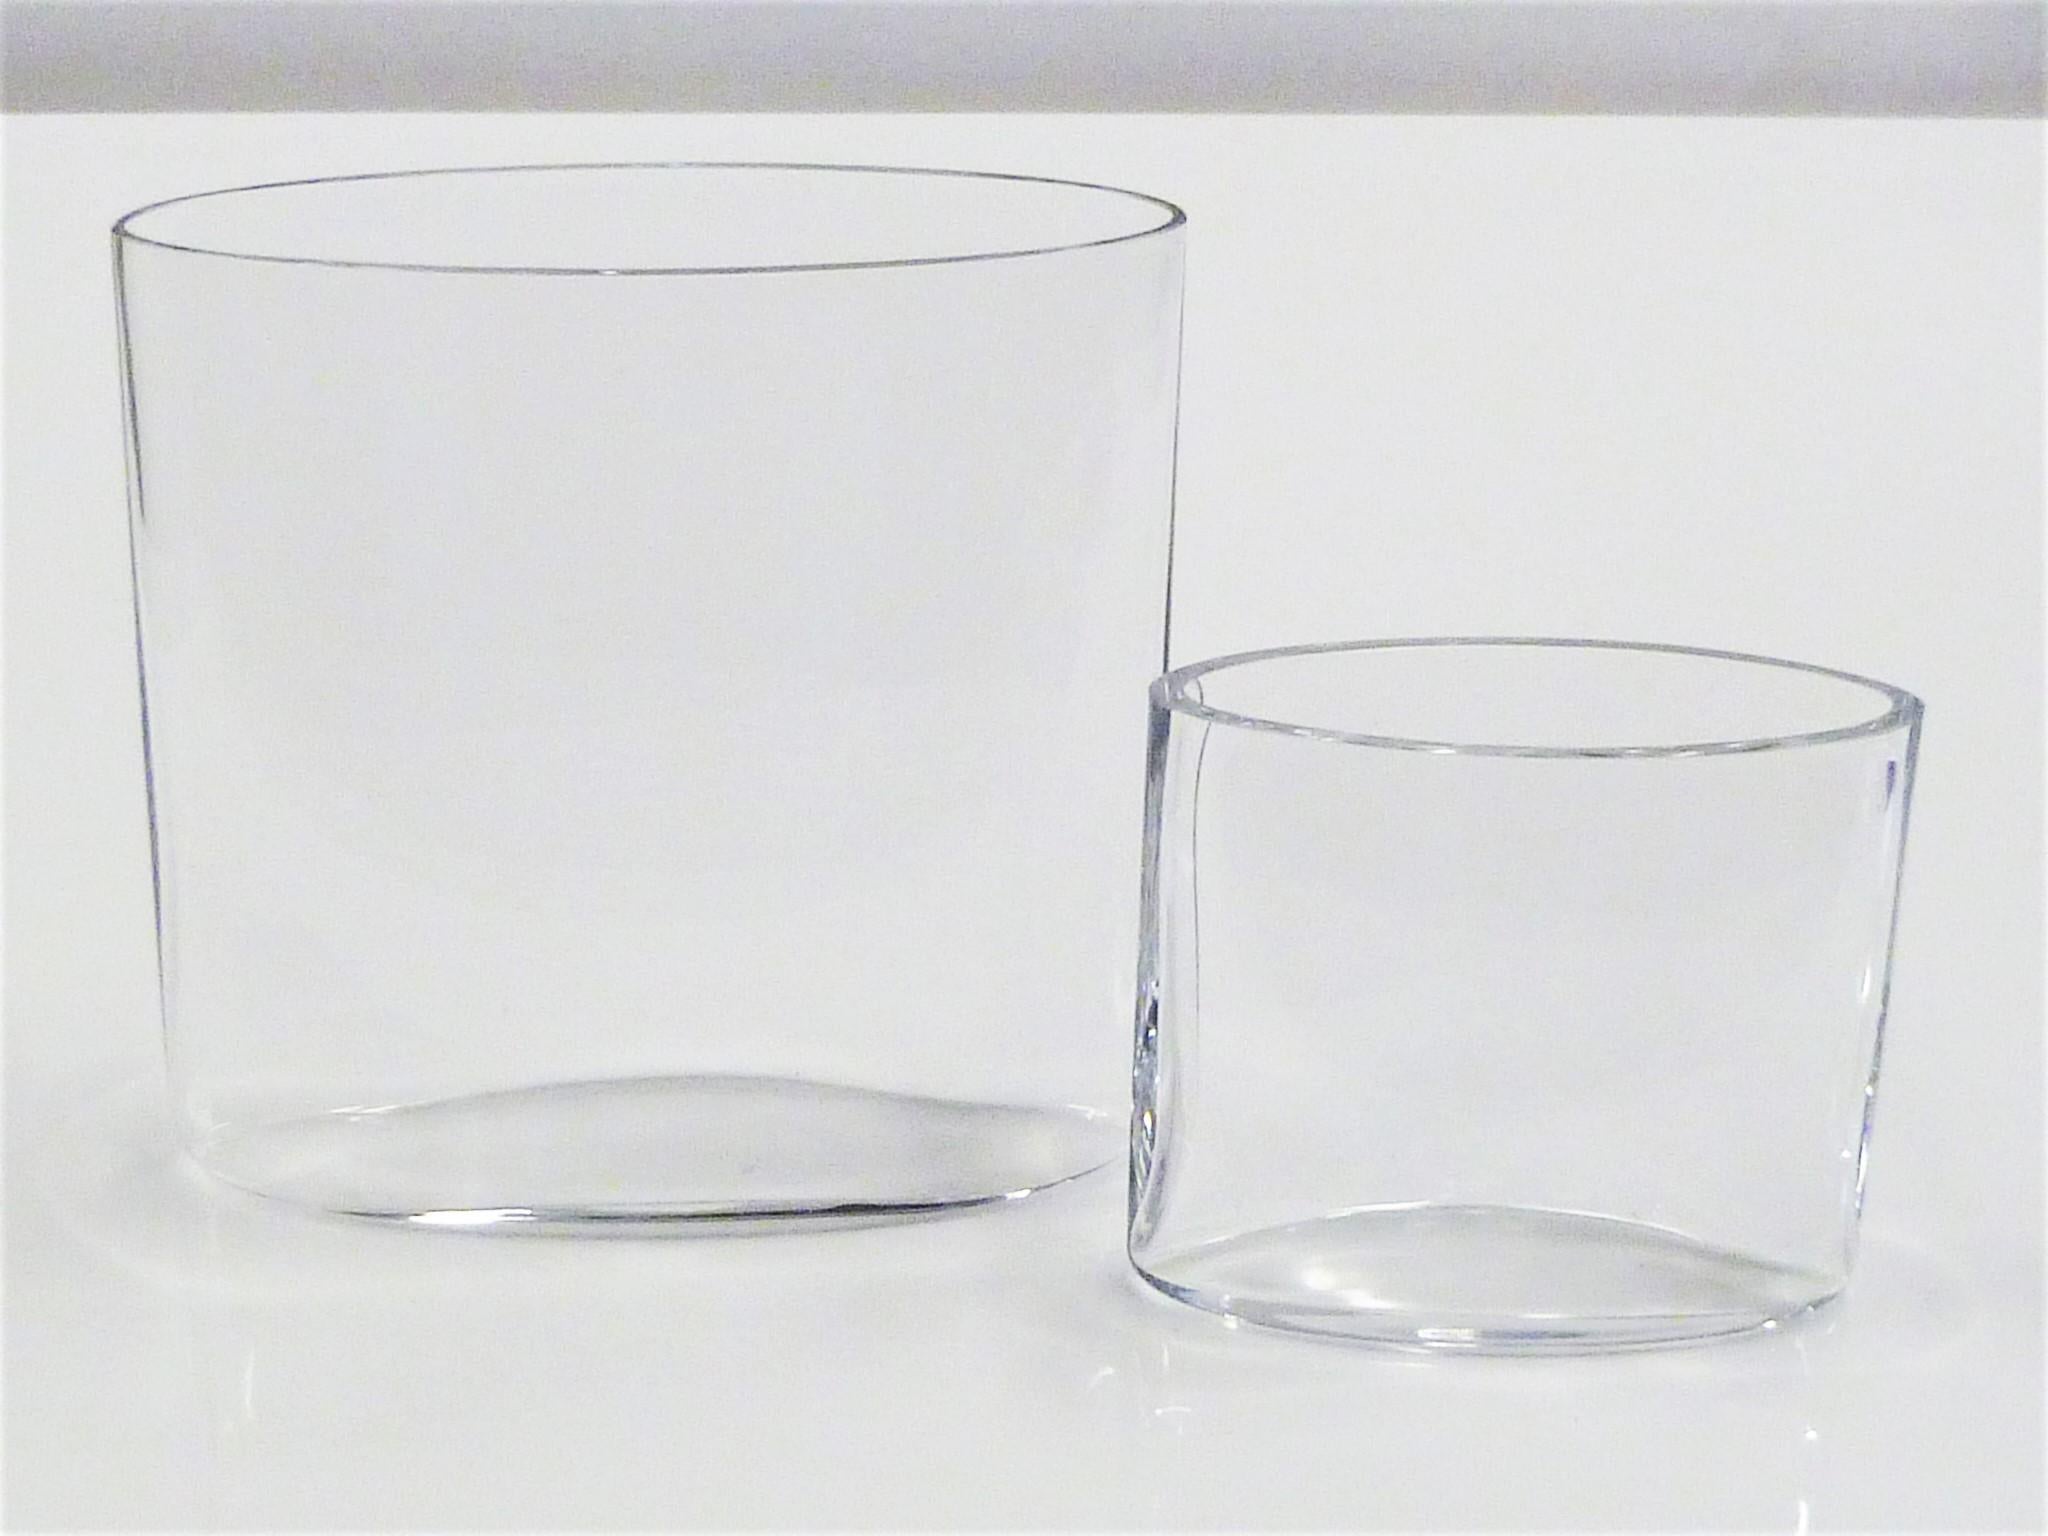 REDUCED FROM $550....Pair of clear glass Ovalis Vases designed by Tapio Wirkkala (1915-1985) for Iittala, Finland in 1958. These hand blown elliptical shaped vases demonstrate the beautiful optical qualities of such a process. This pair is from the